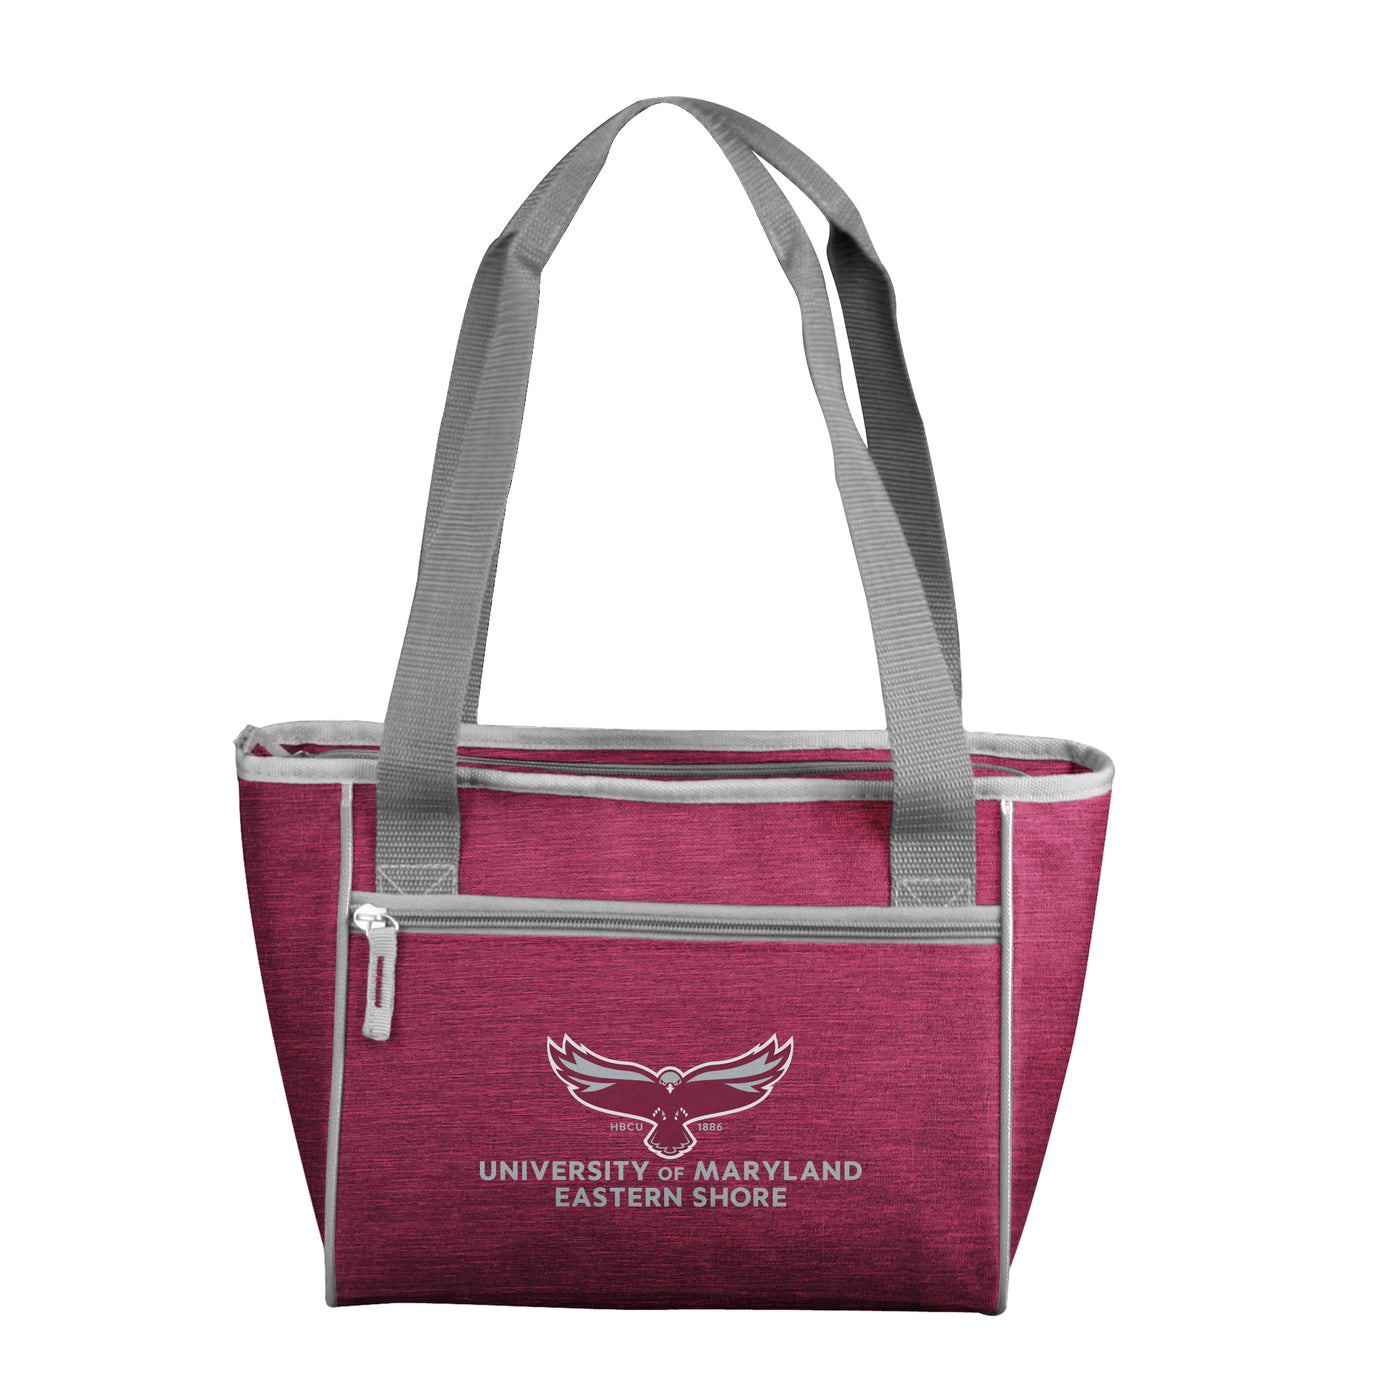 Maryland Eastern Shore 16 Can Cooler Tote